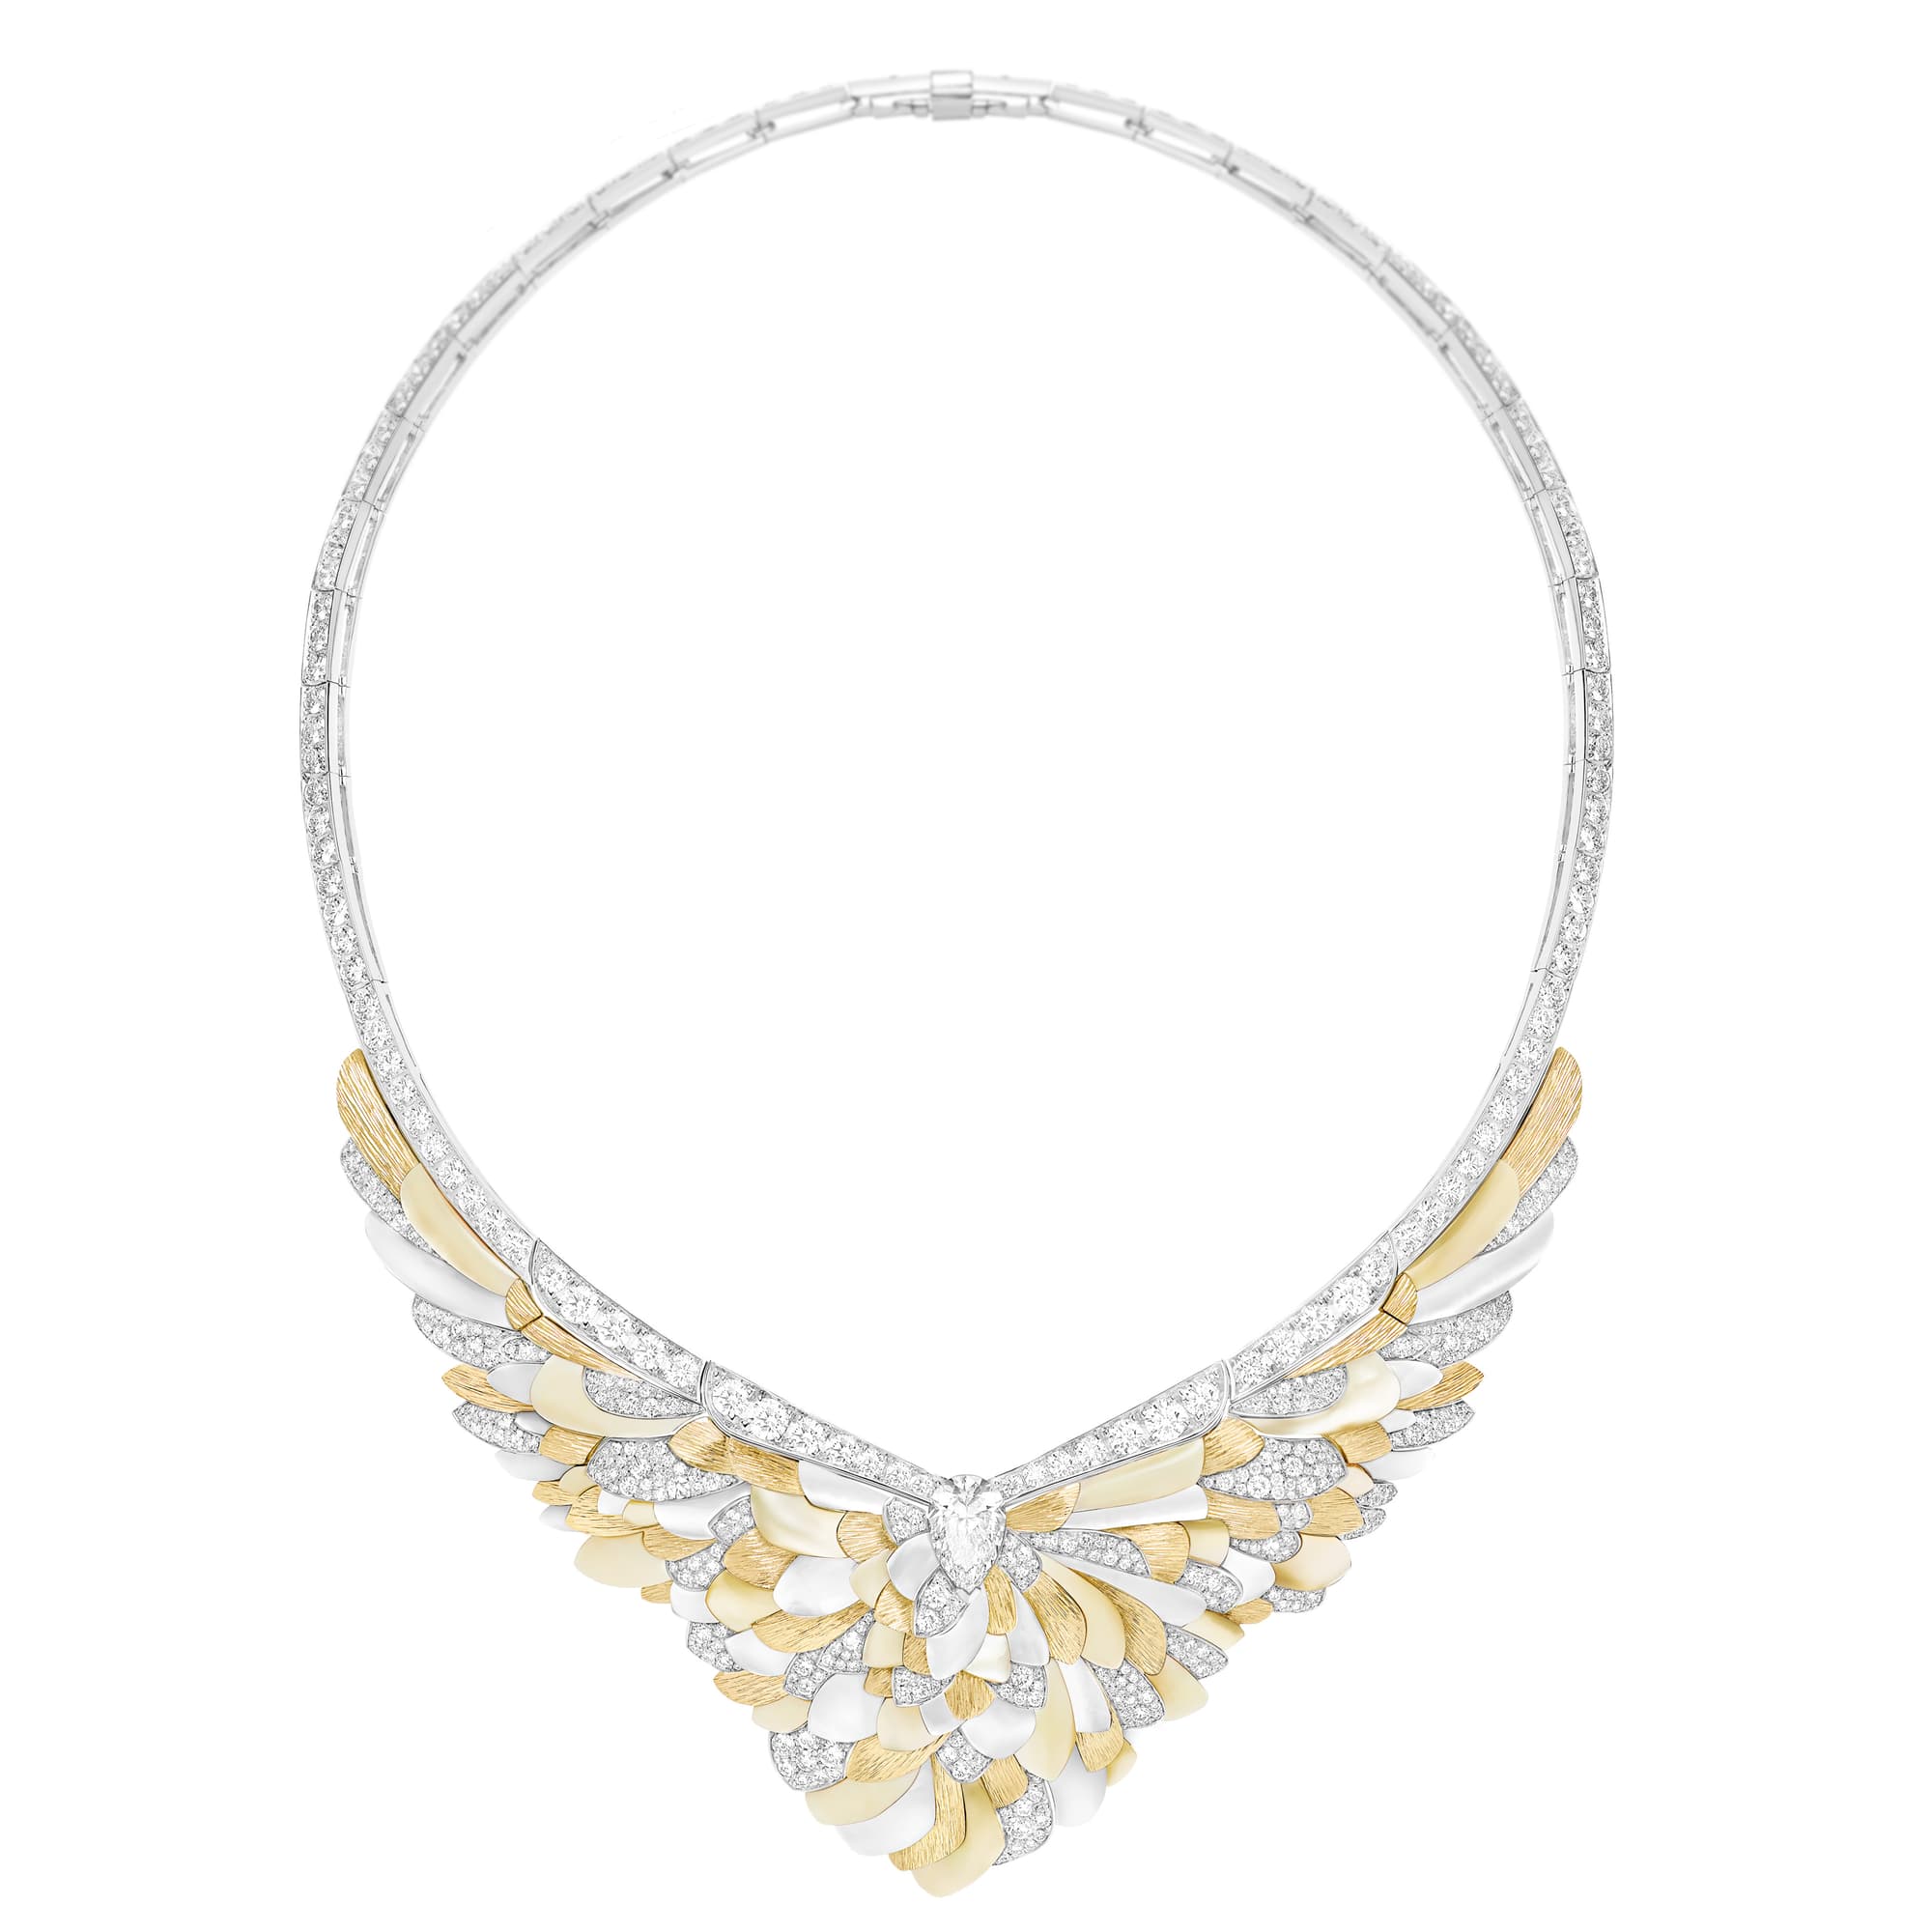 Piaget Unveils Its New High Jewelry Collection, Metaphoria